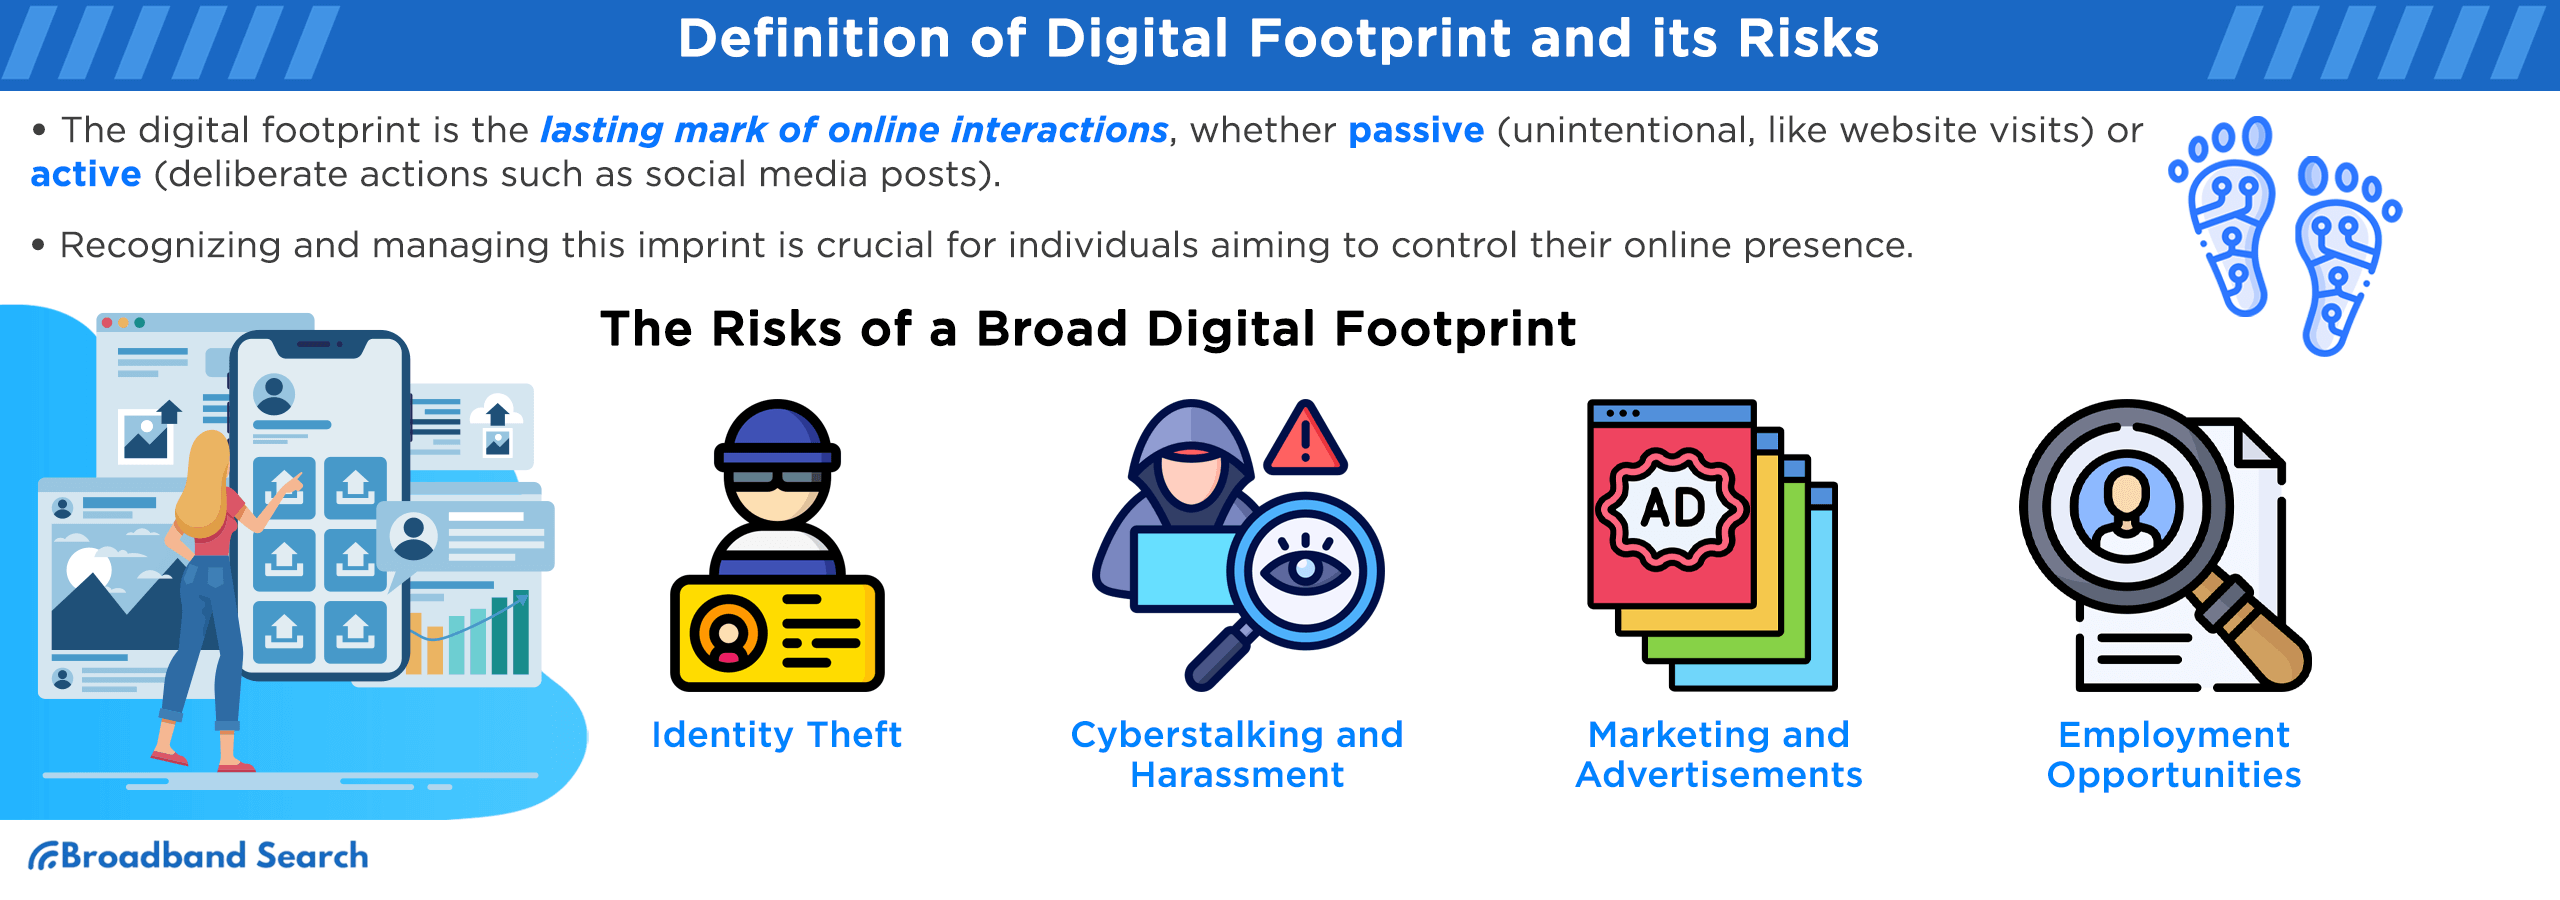 Definition of Digital footprint and its risks